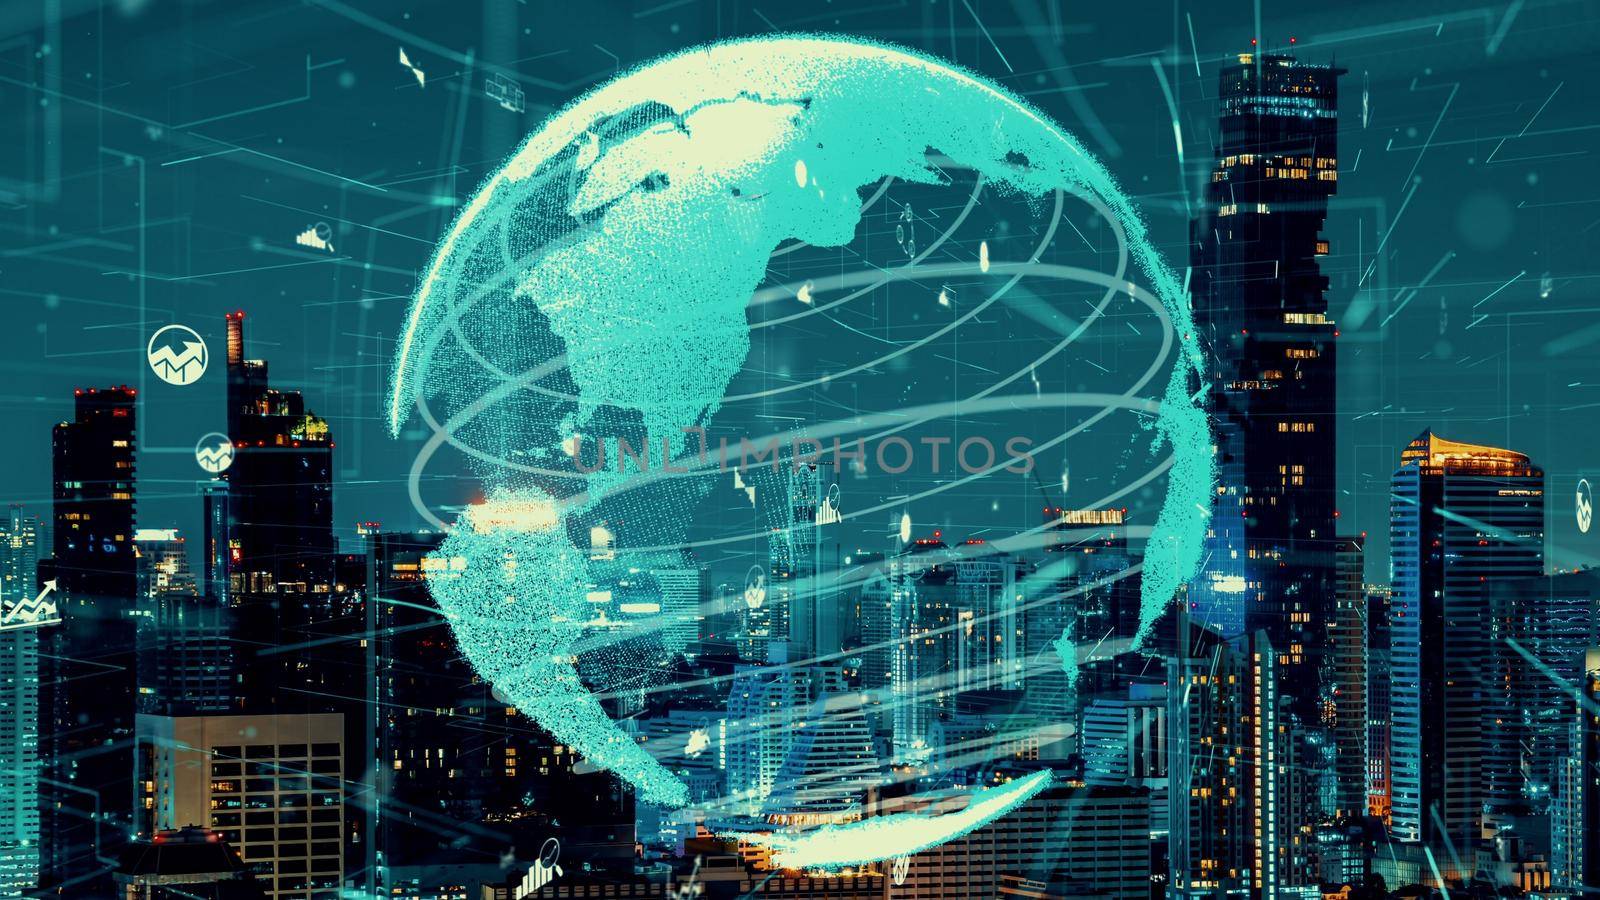 Global connection and the internet network alteration in smart city . Concept of future wireless digital connecting and social media networking .